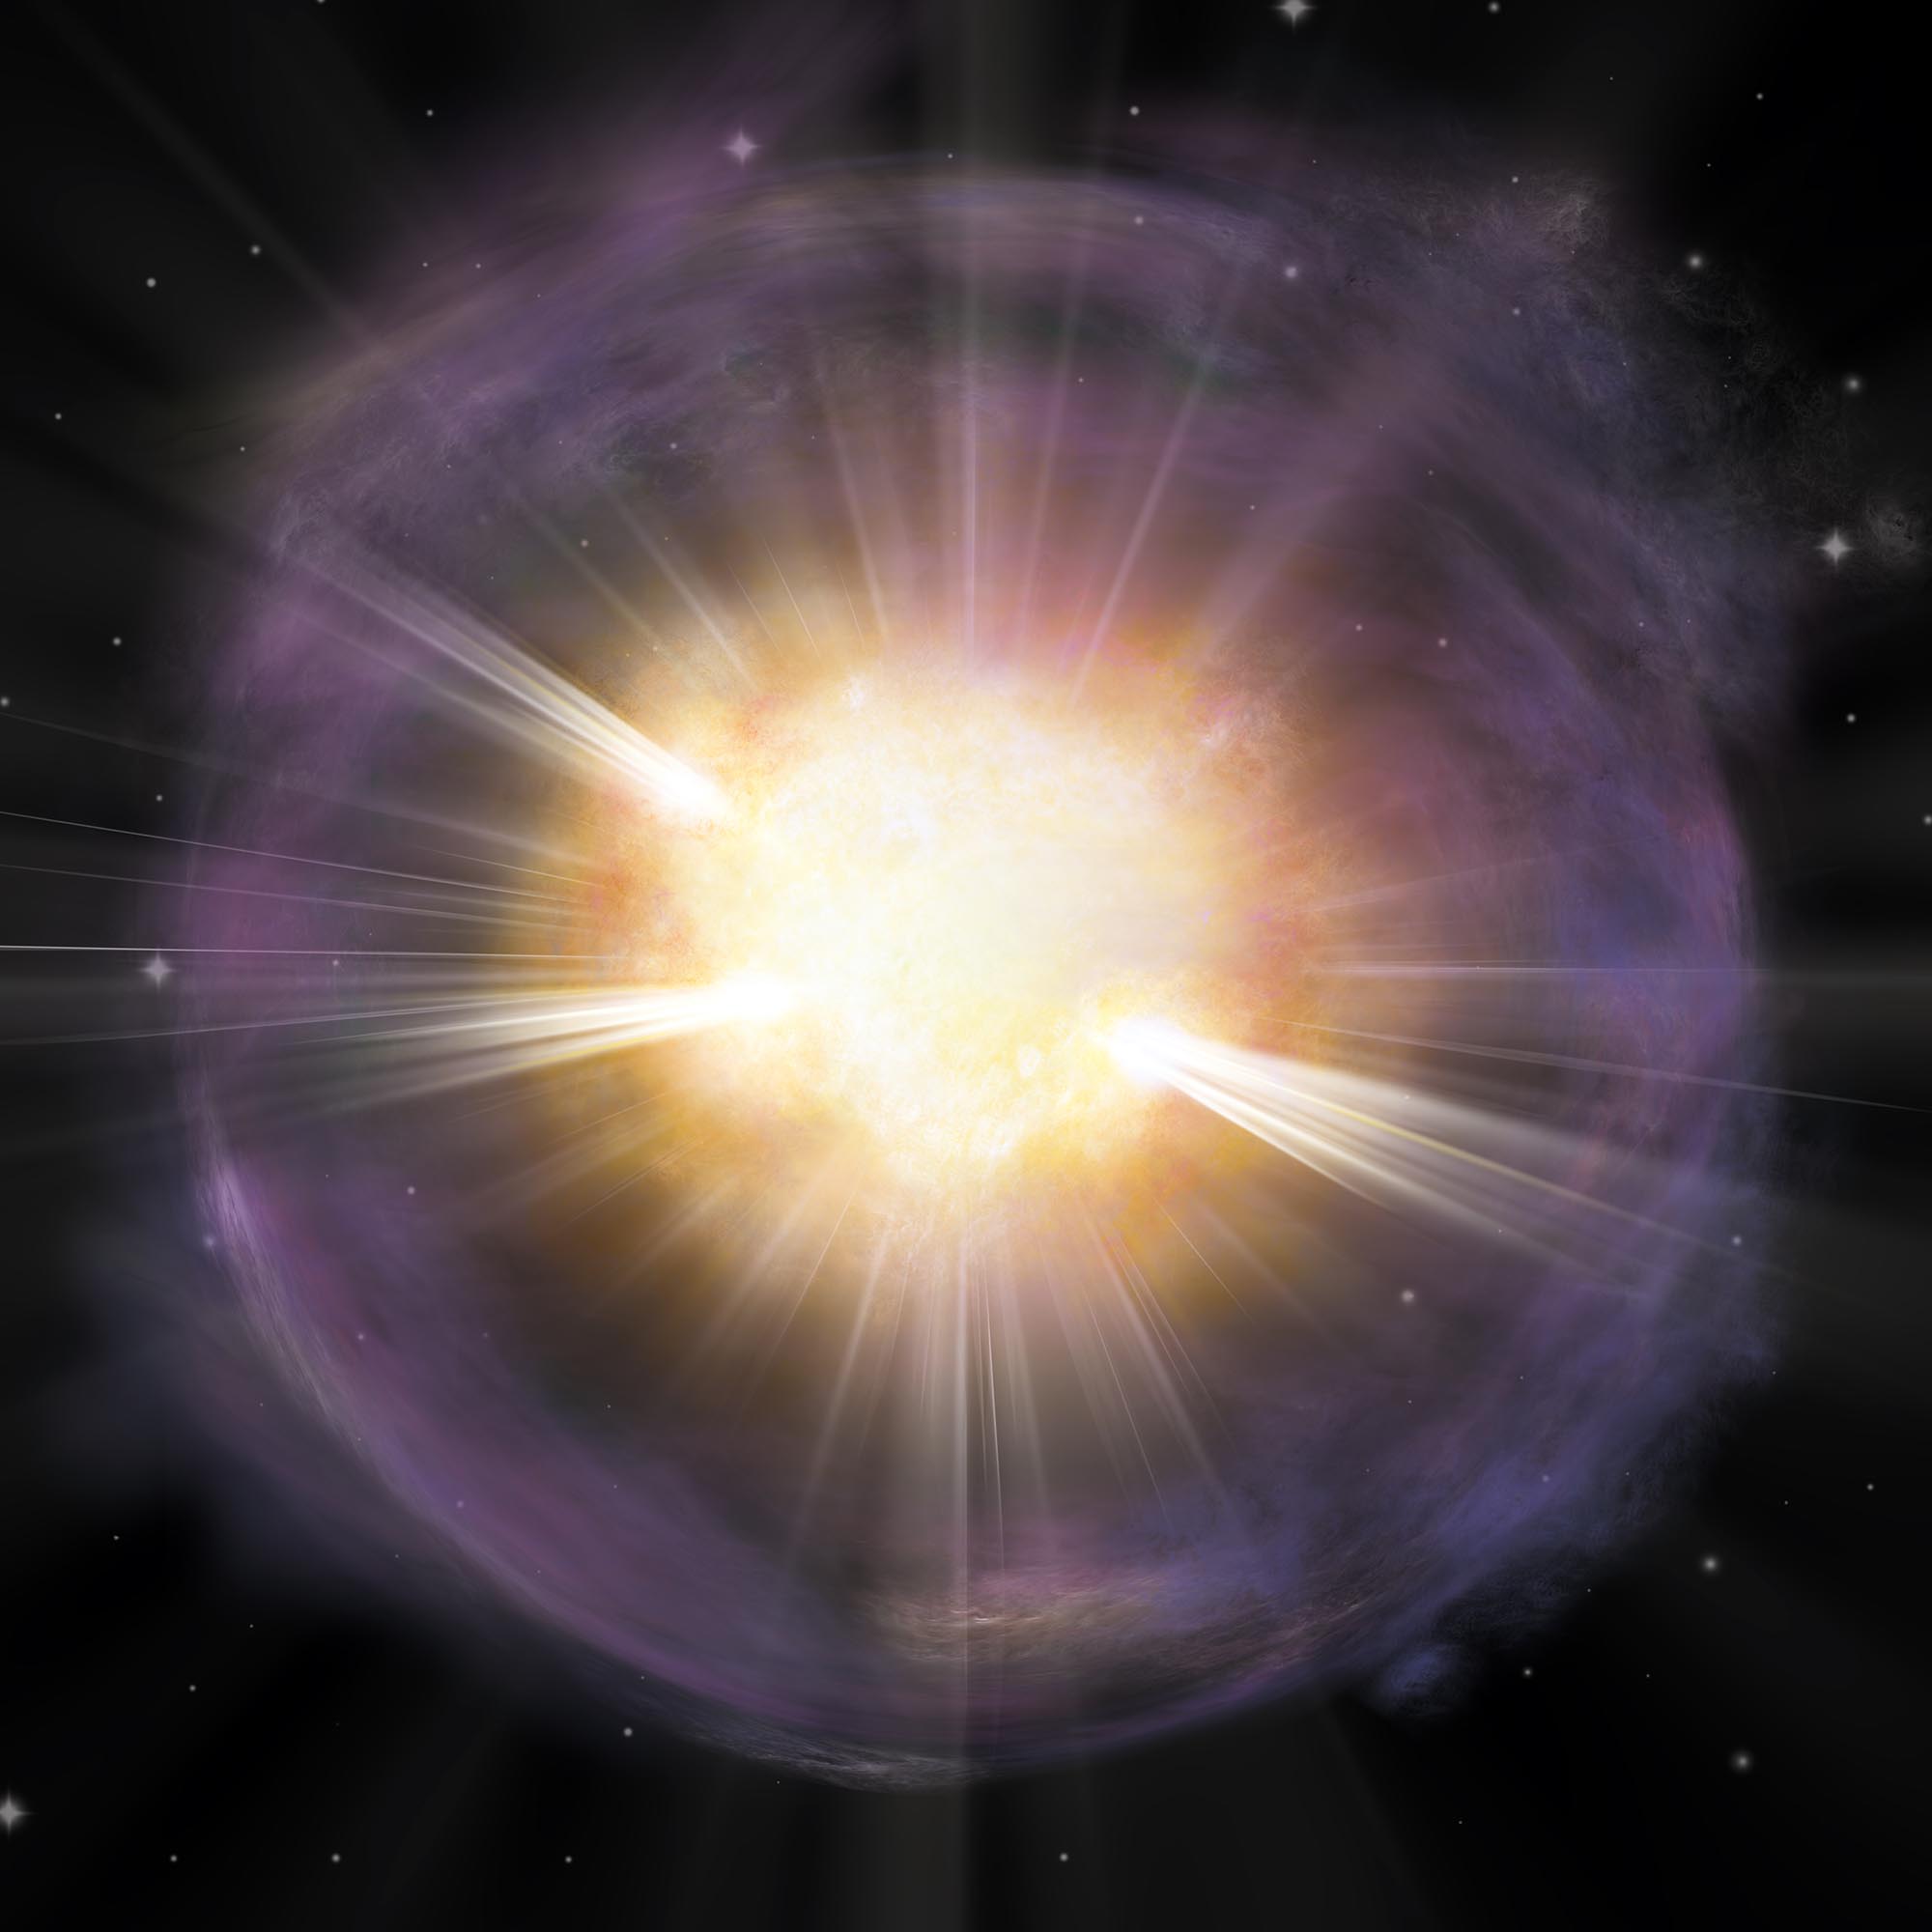 Artist impression of a supernova, yellow in the center surrounded by purple gas